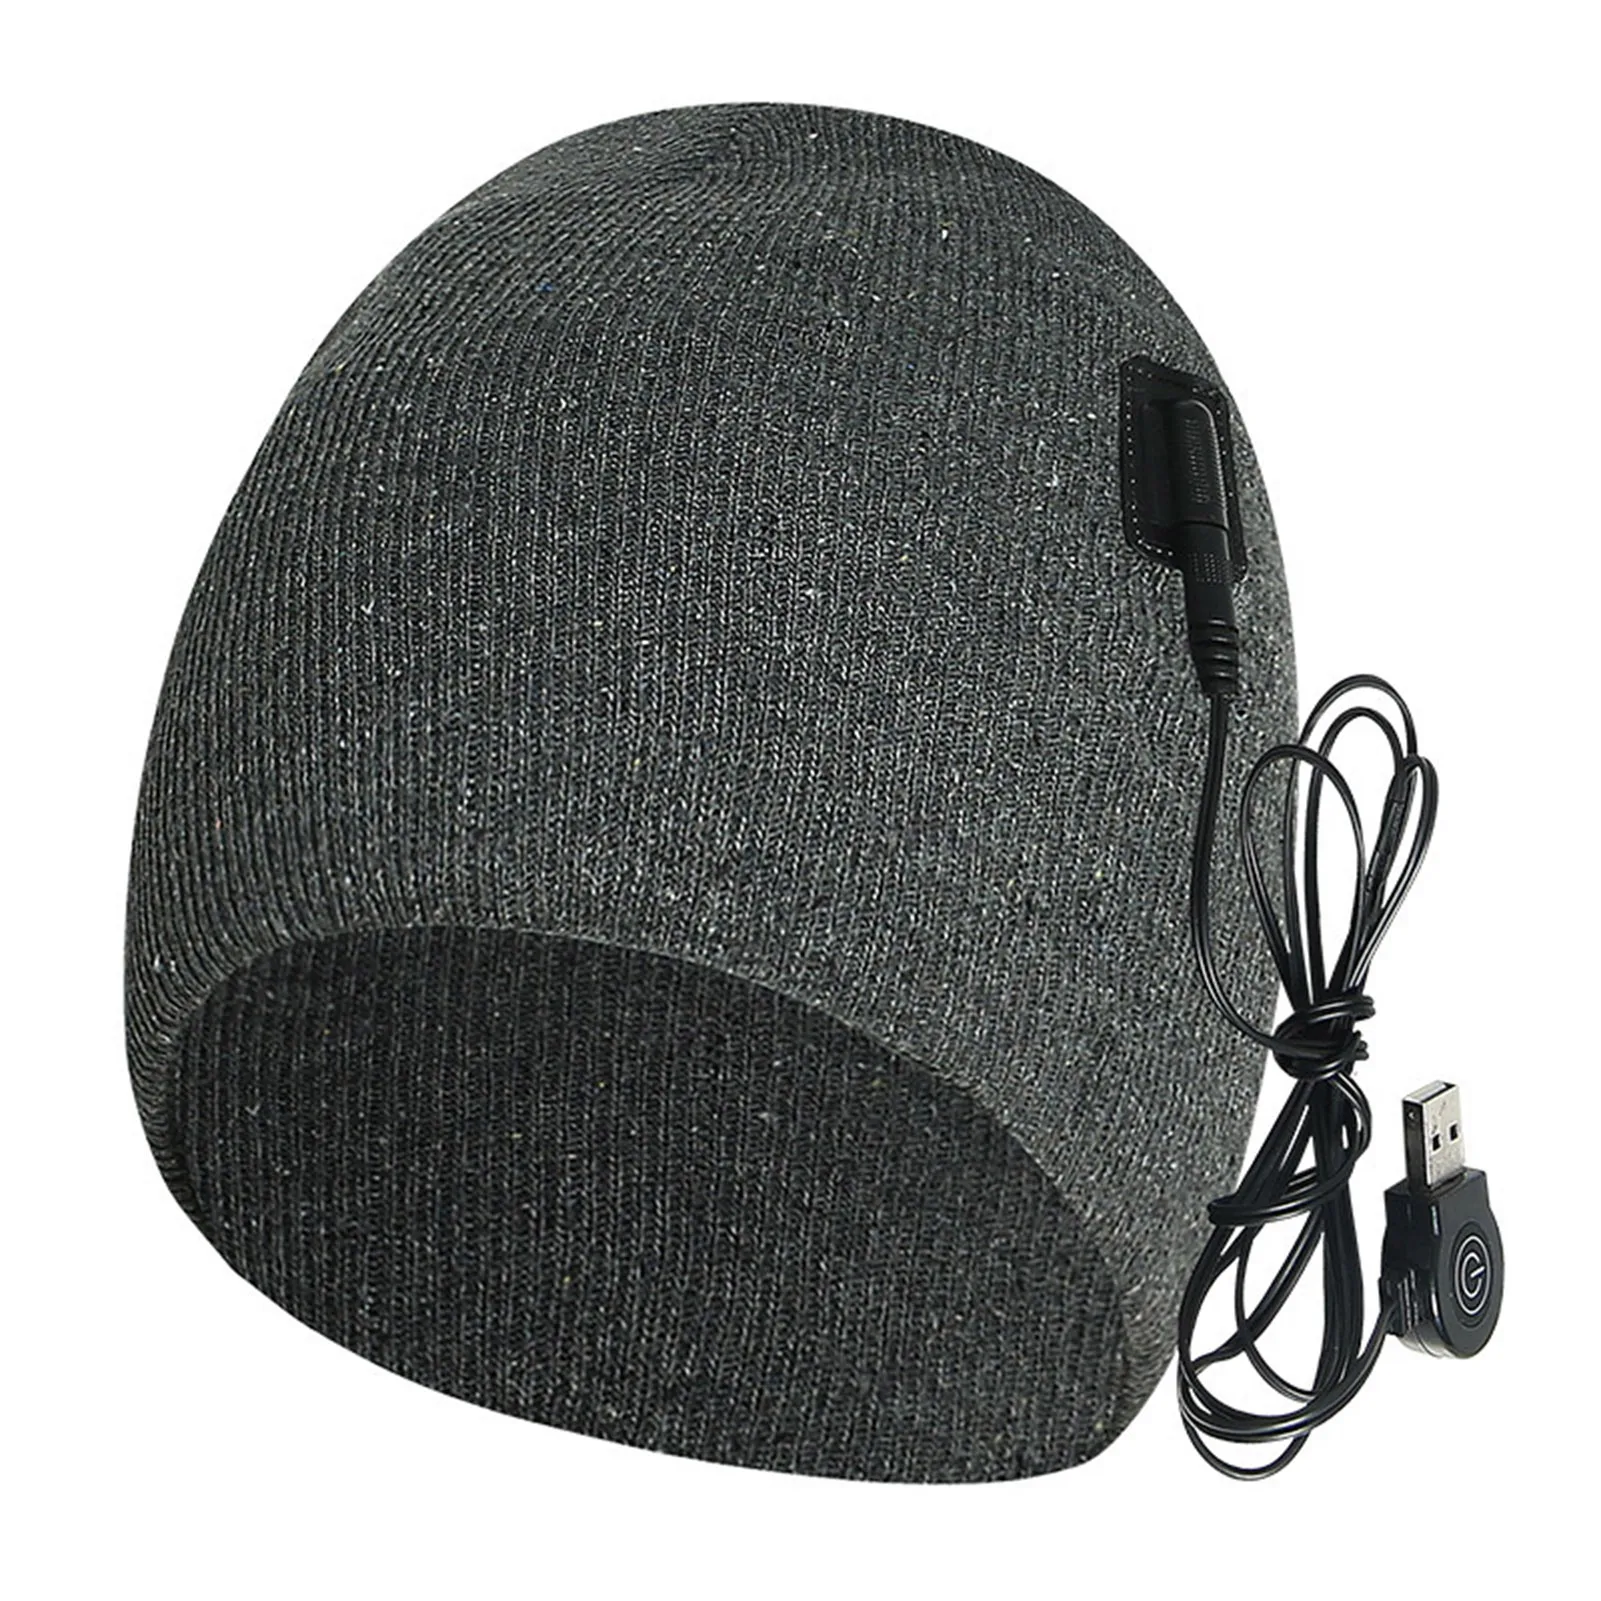 

Winter Heated Cap for Men Women Carbon Fiber Heating Thermal Beanies for Outdoor Fishing Trip Dating Shopping